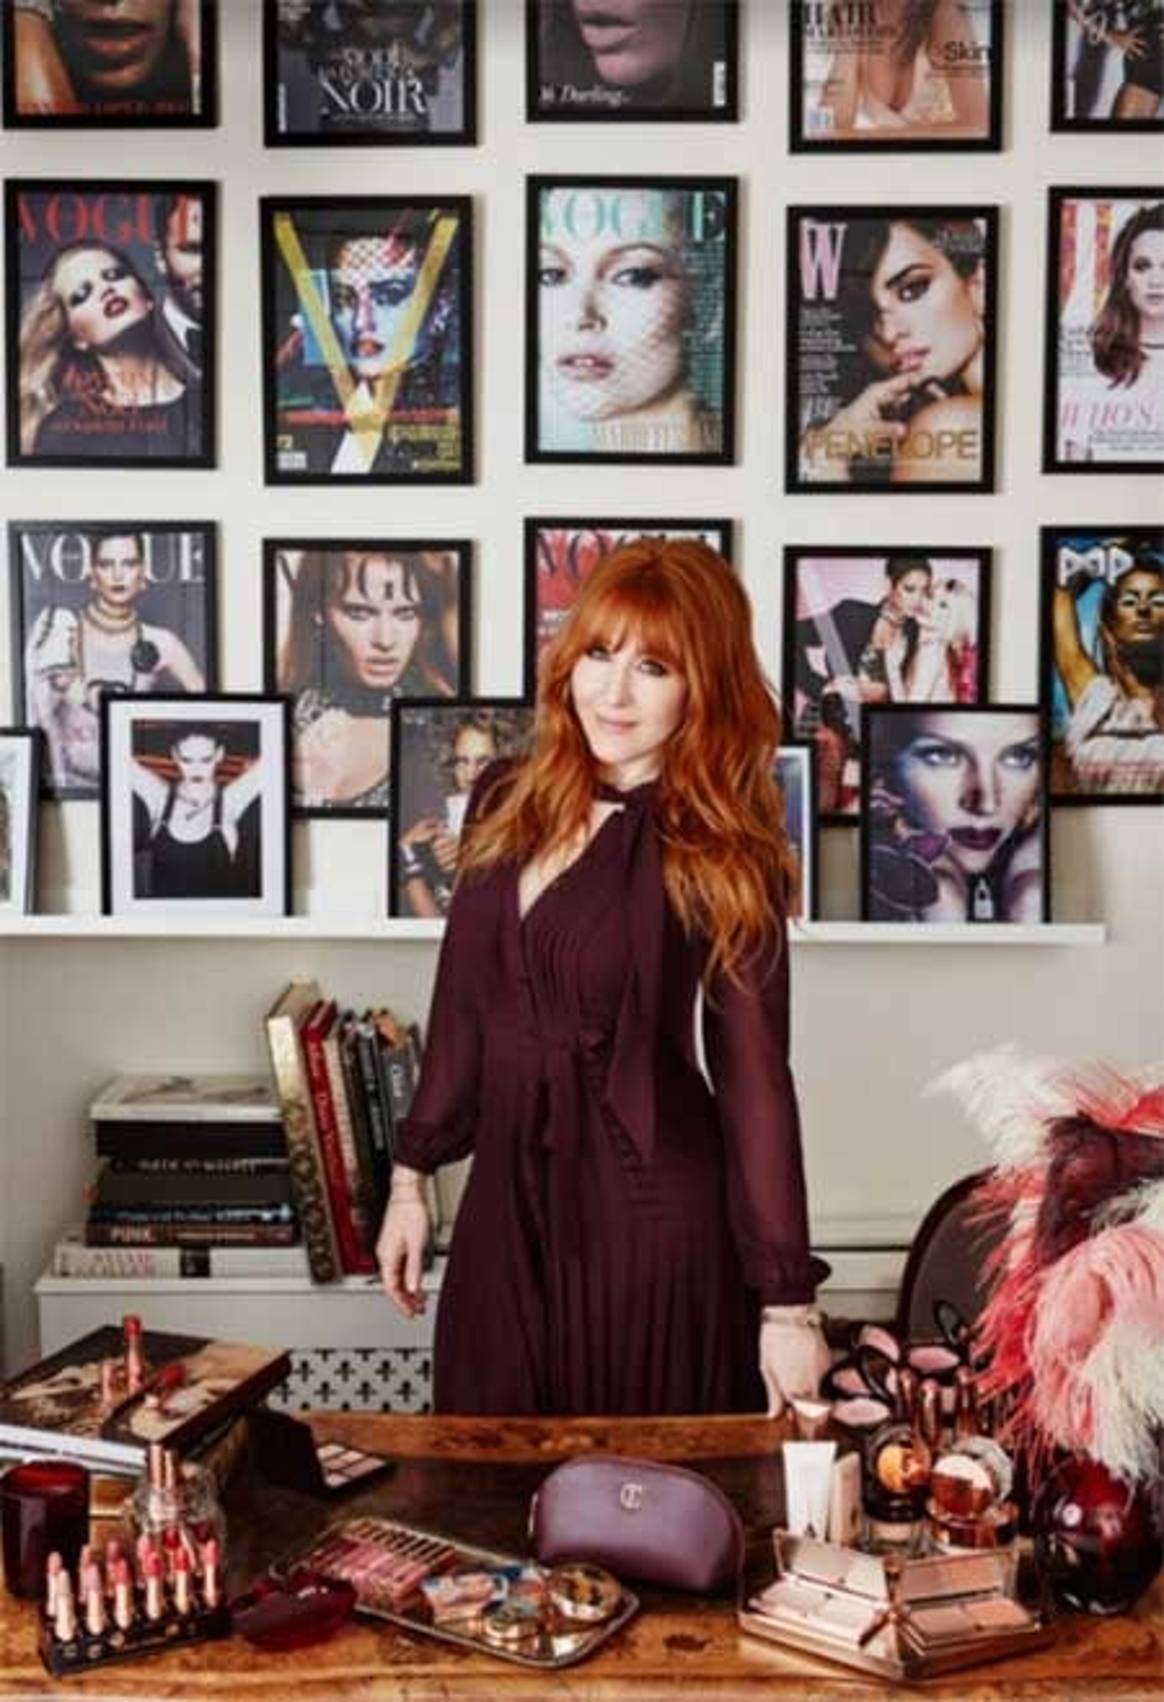 Charlotte Tilbury awarded MBE in the Queen's Birthday Honours List 2018